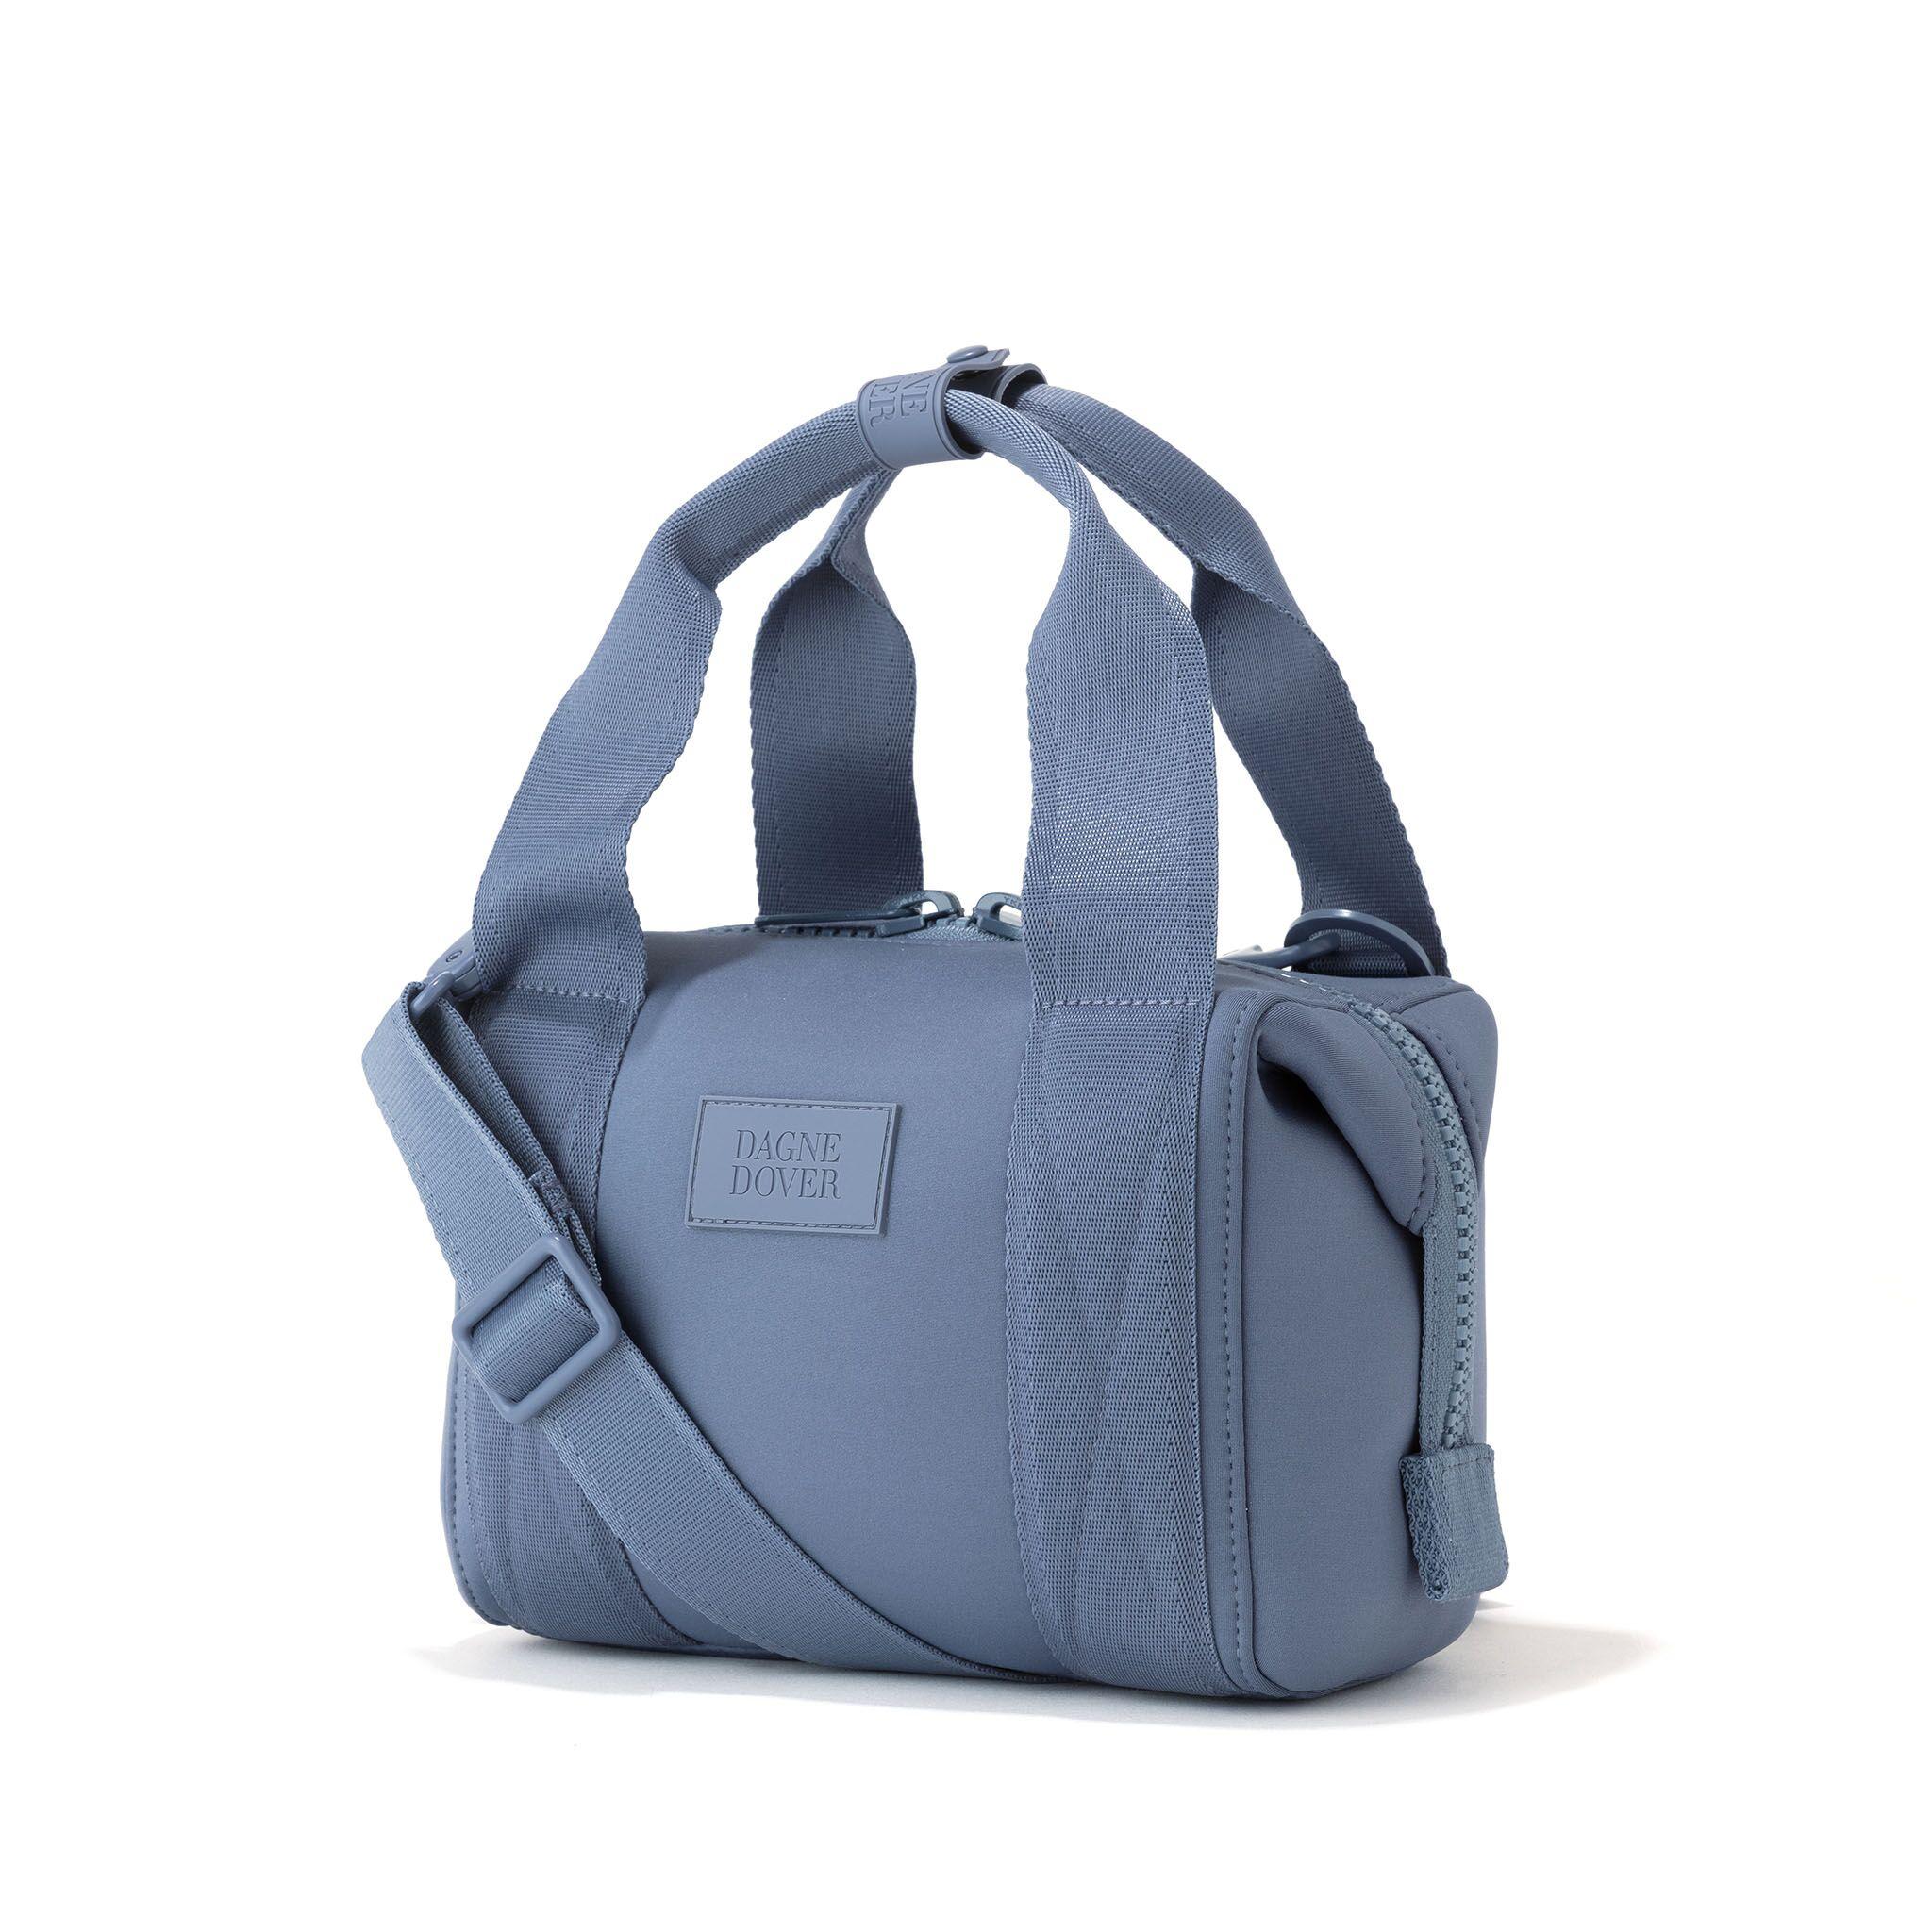 Dagne Dover Landon Carryall In Ash Blue, Extra Small - Lyst